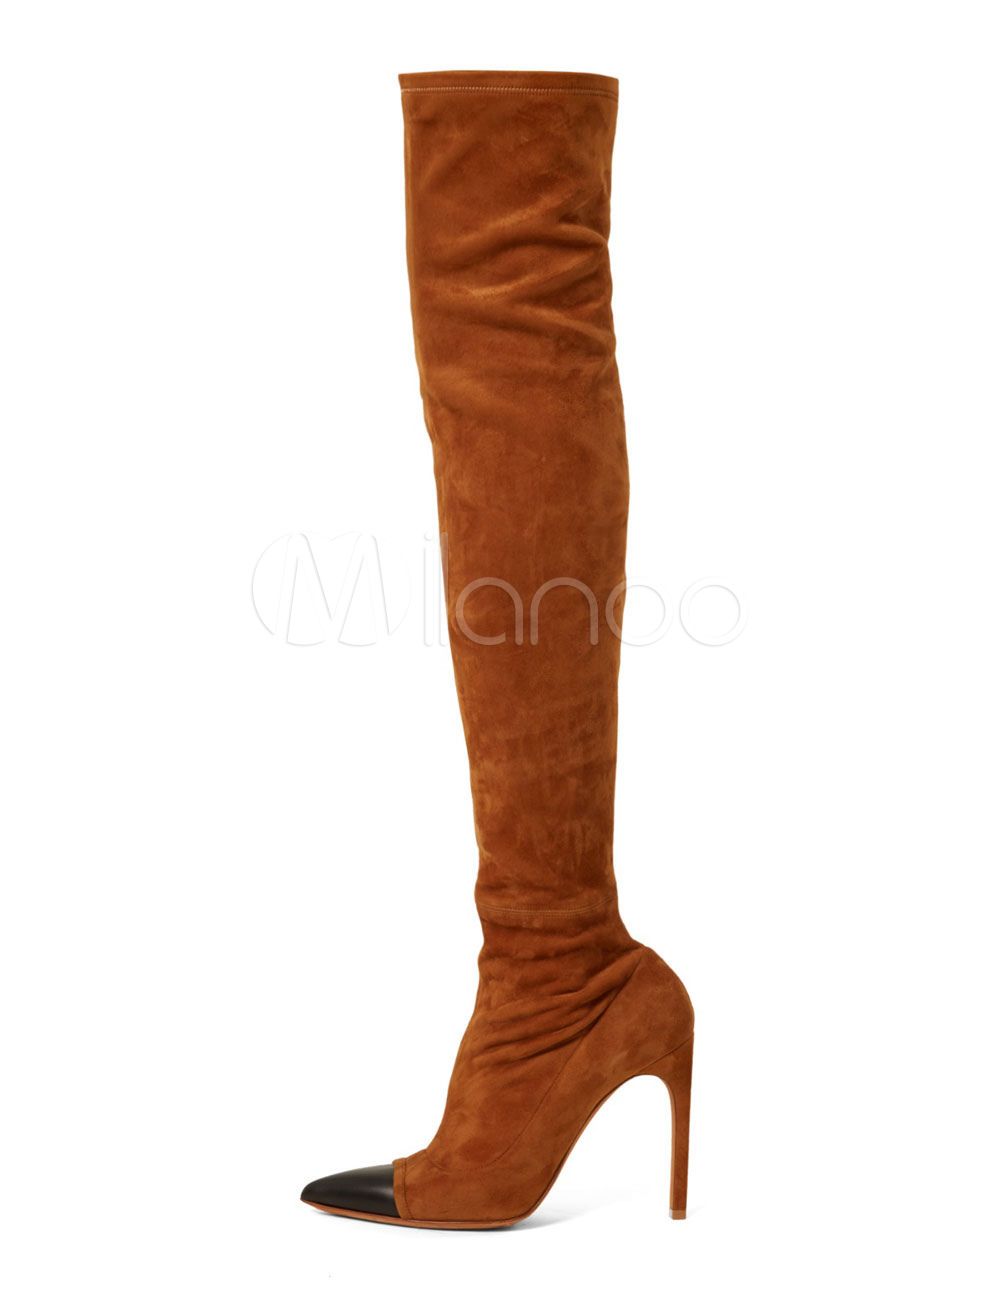 Over Knee Boots Brown Thigh High Boots Nubuck Pointed Toe High Heel Women Boots | Milanoo